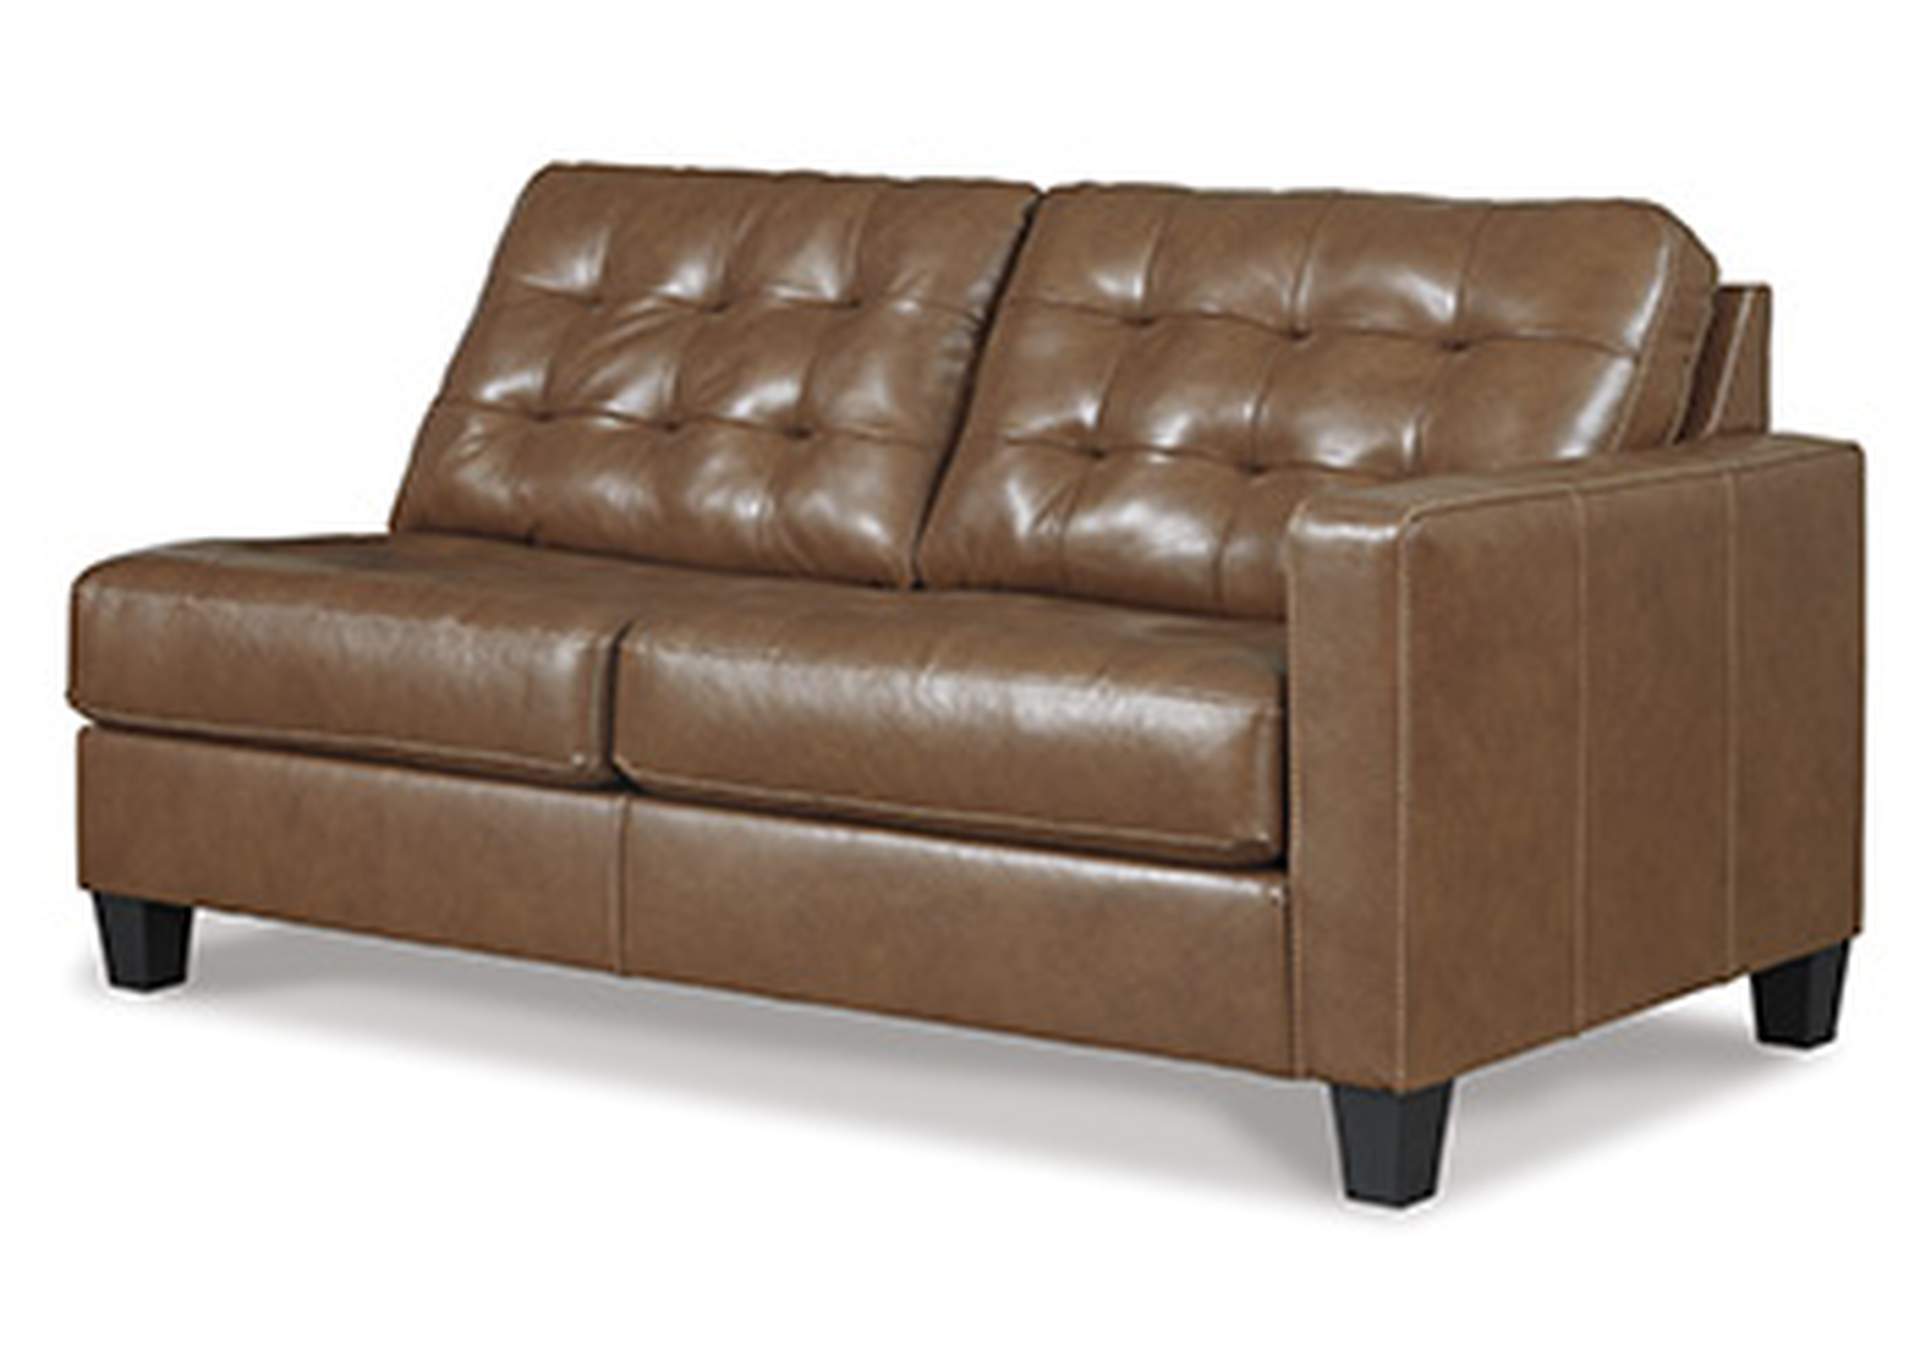 Baskove Right-Arm Facing Loveseat,Signature Design By Ashley